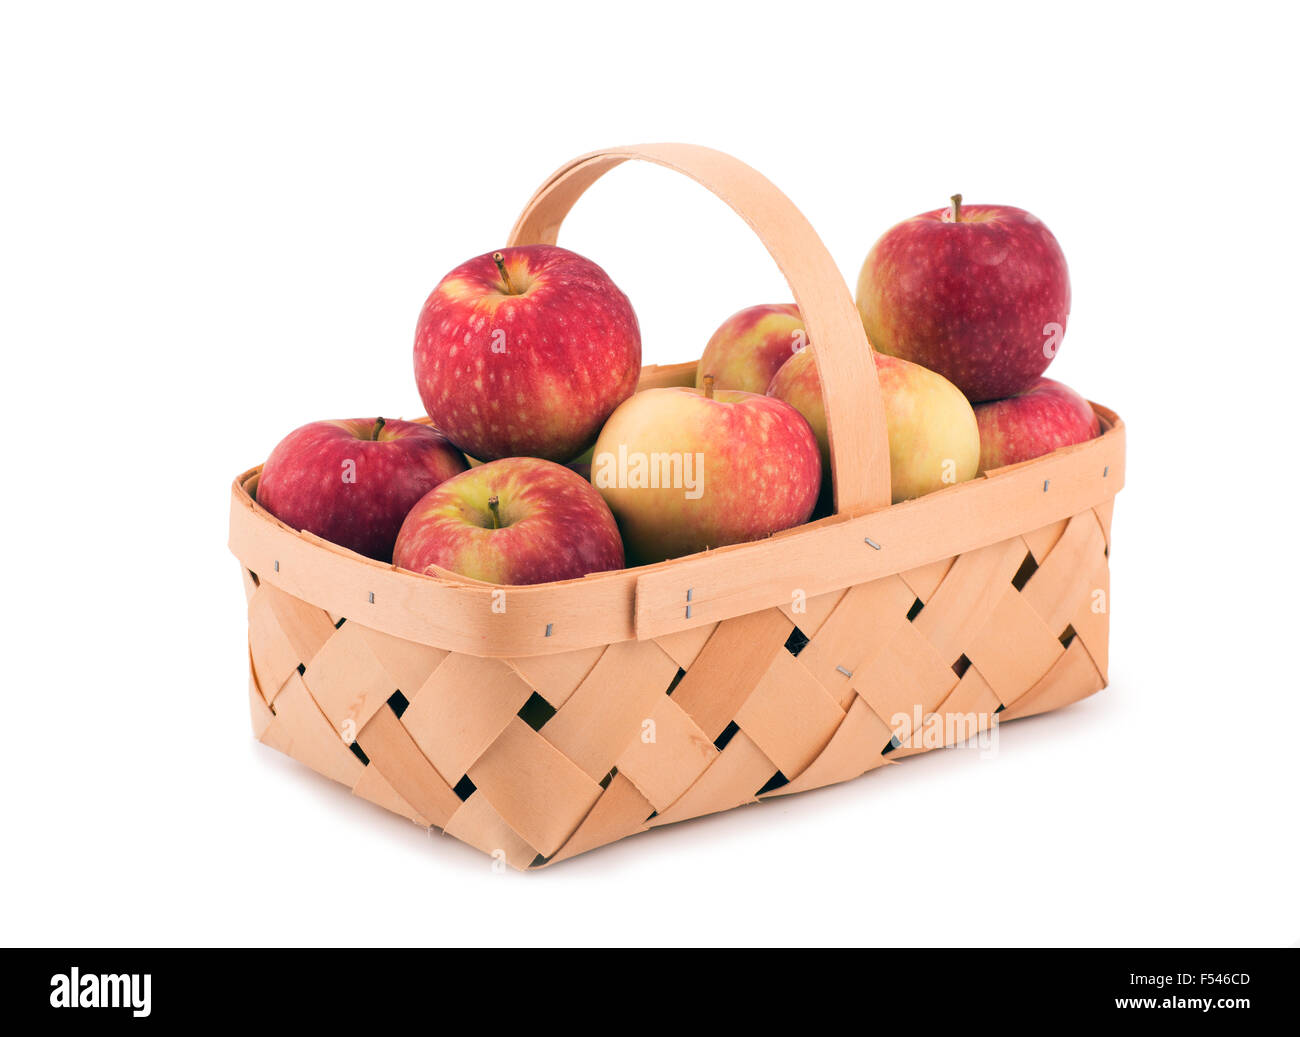 Apples in a wooden basket, on white Stock Photo